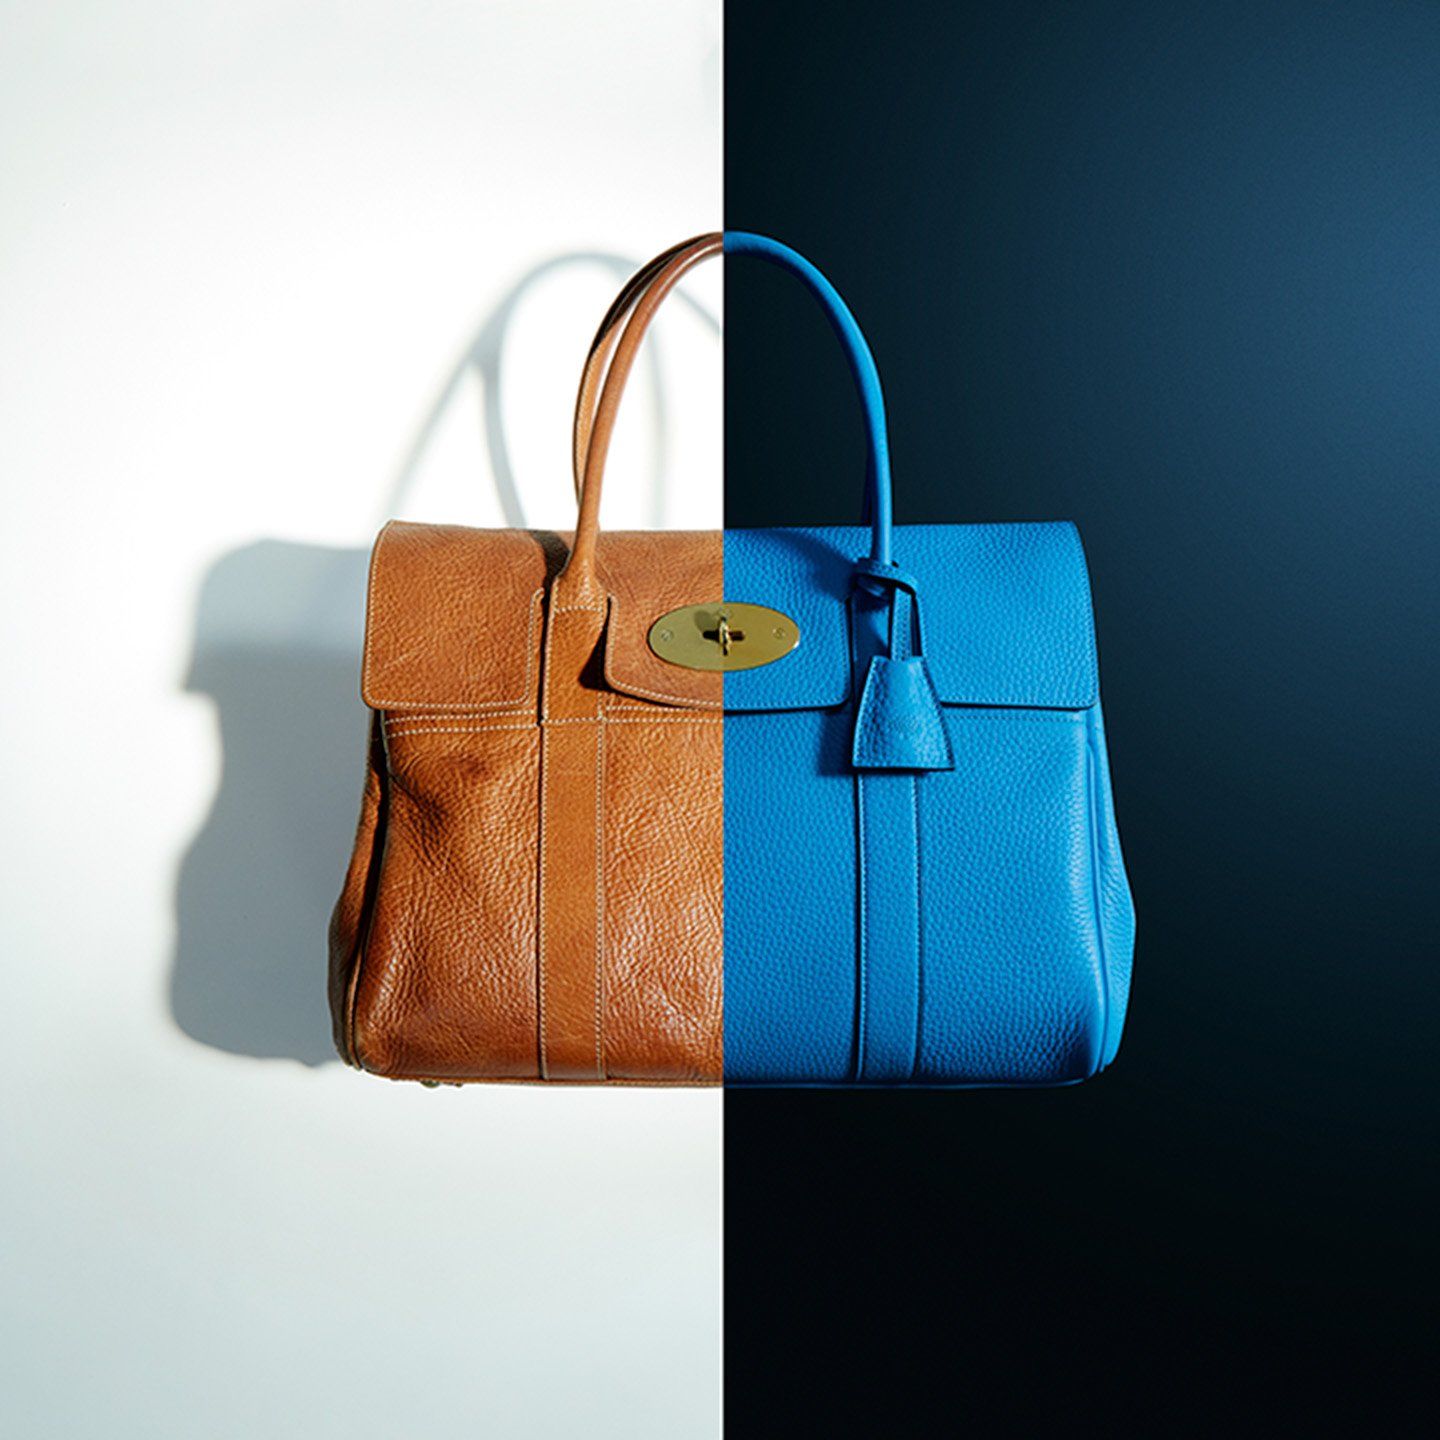 Mulberry Bayswater handbag in brown and blue leather